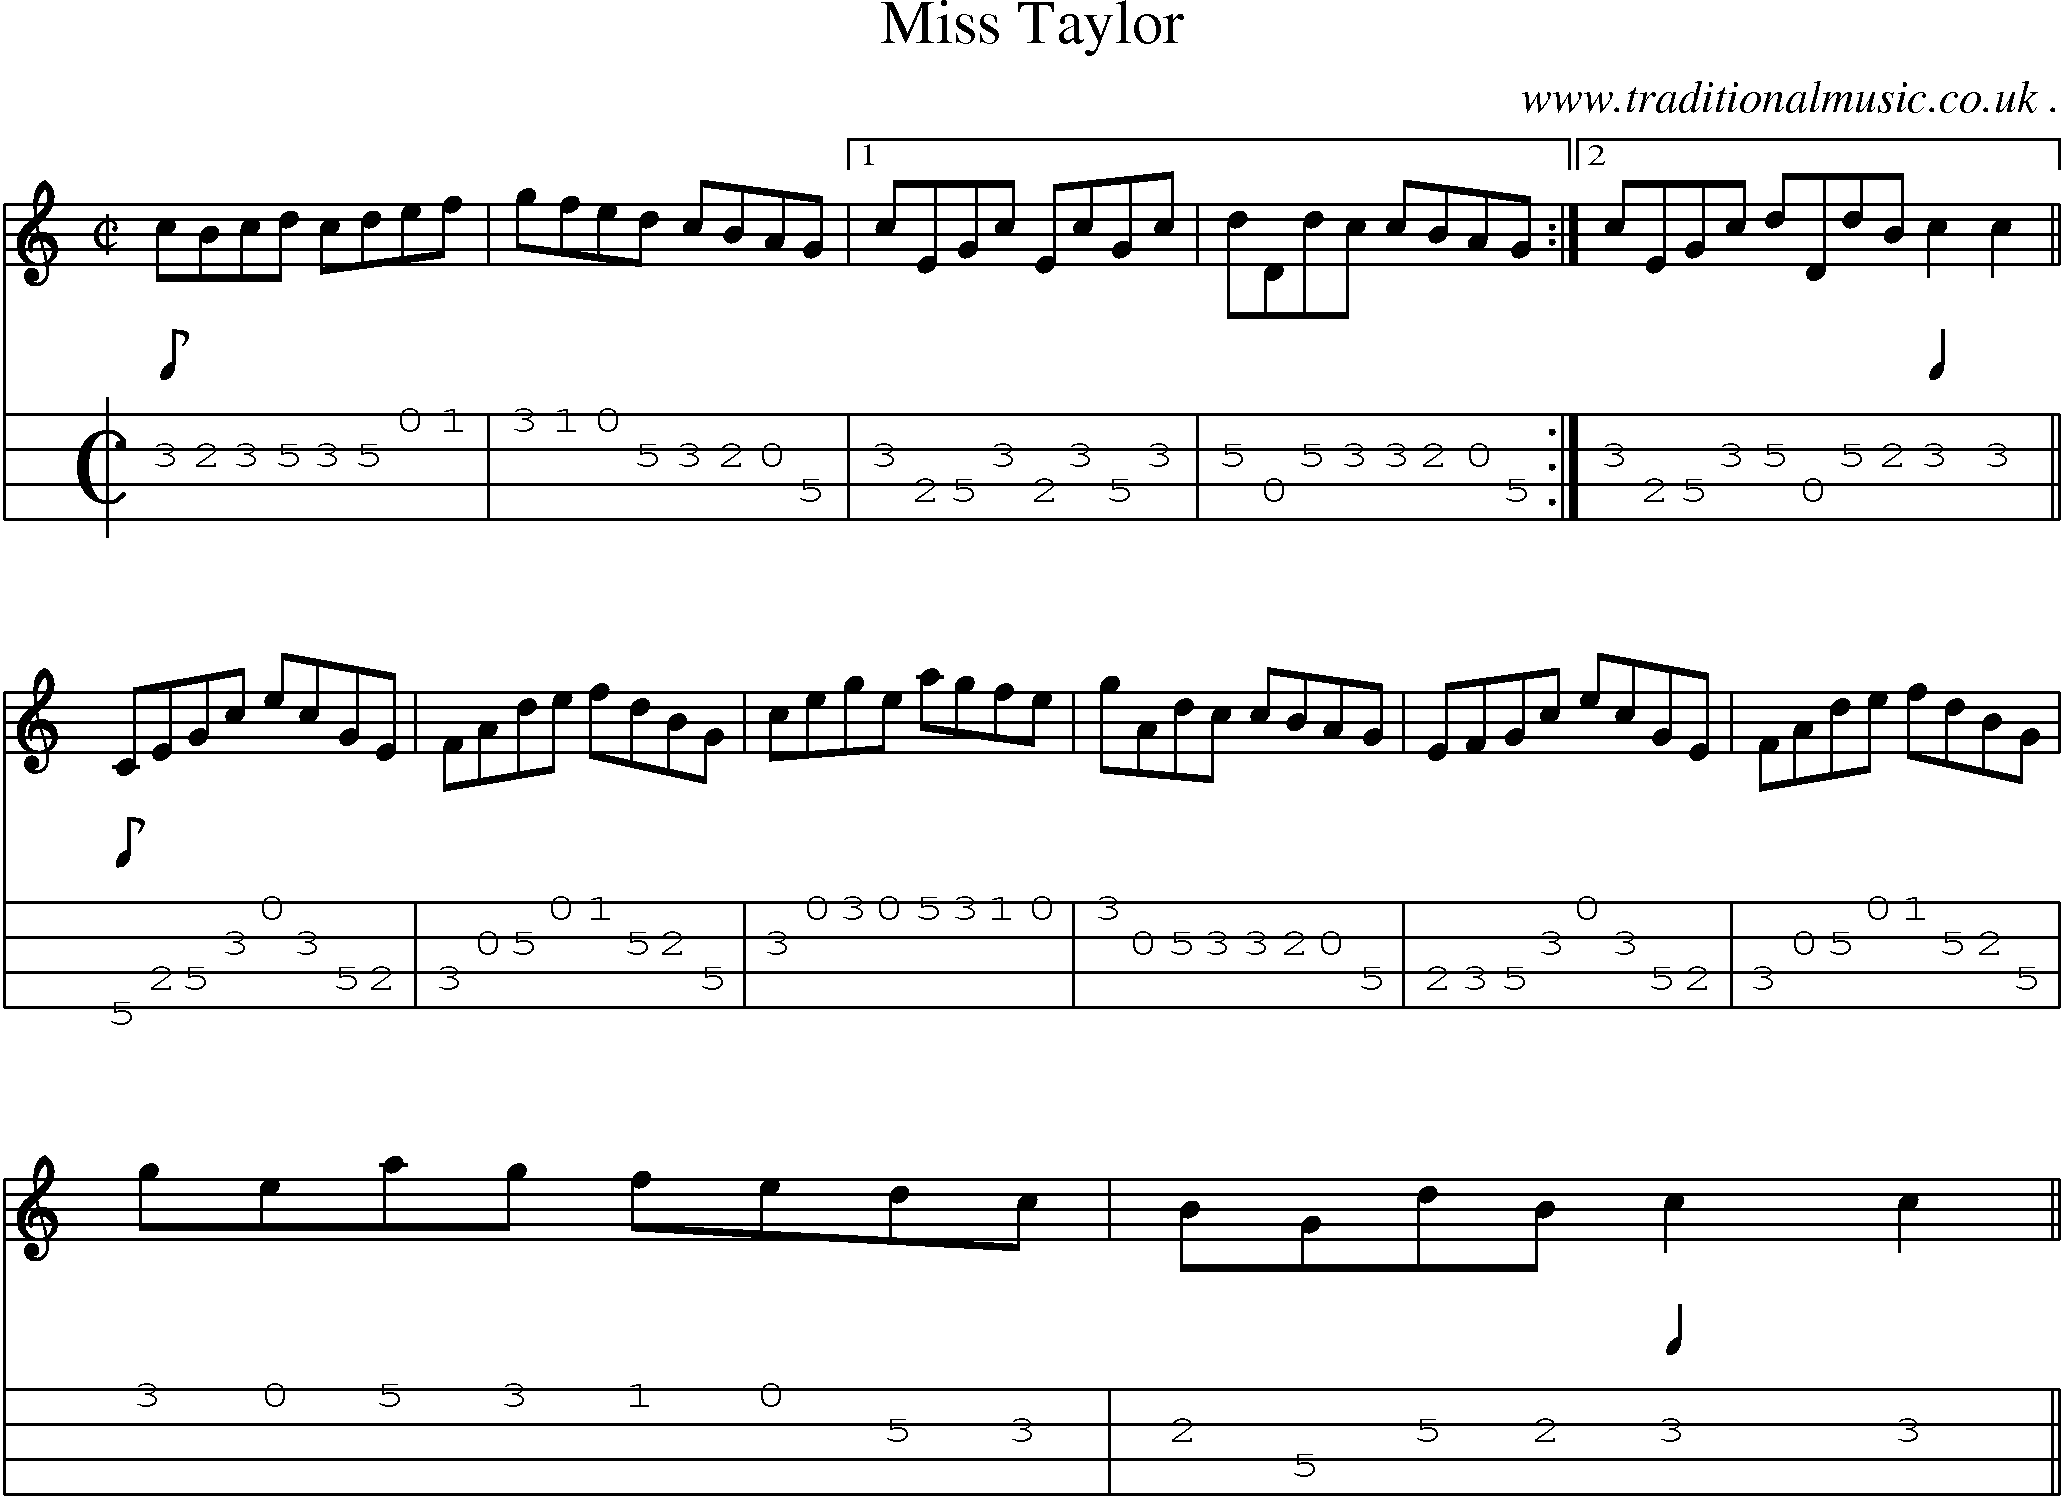 Sheet-music  score, Chords and Mandolin Tabs for Miss Taylor